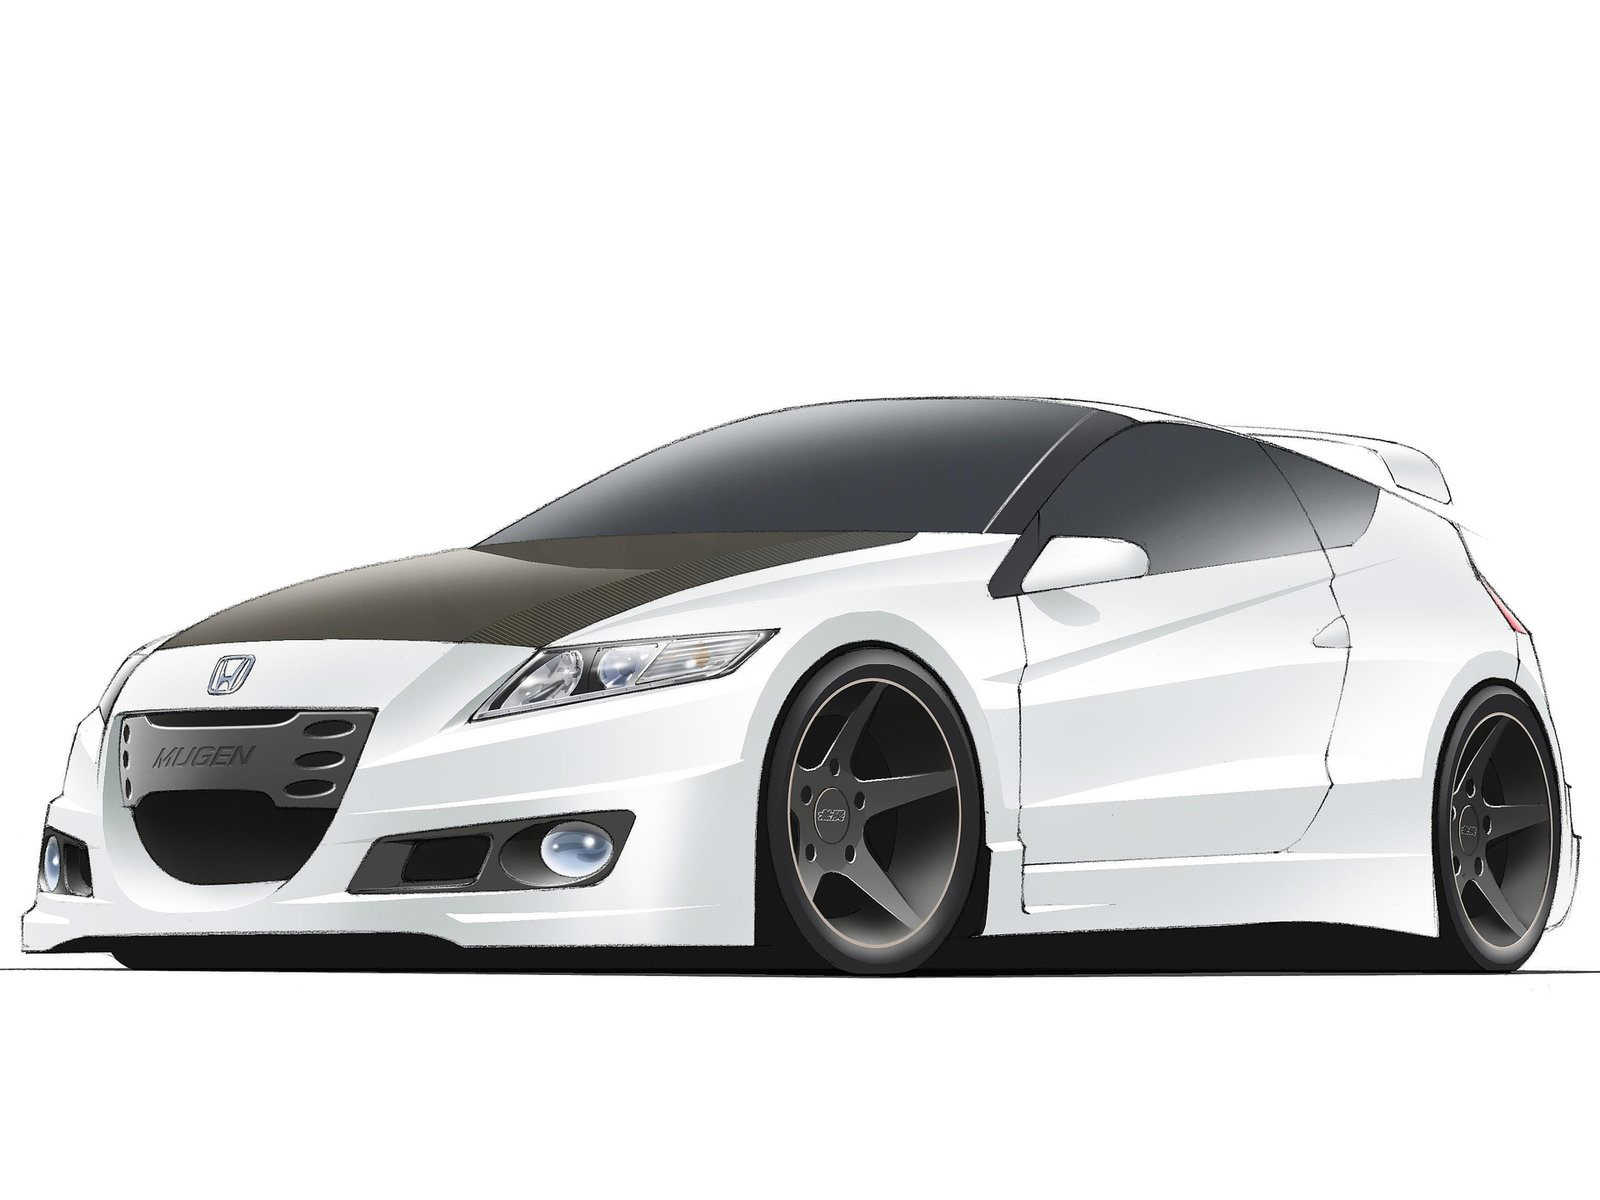 Mugen Euro Has Developed A Highly Tuned Version Of The Honda CR Z That